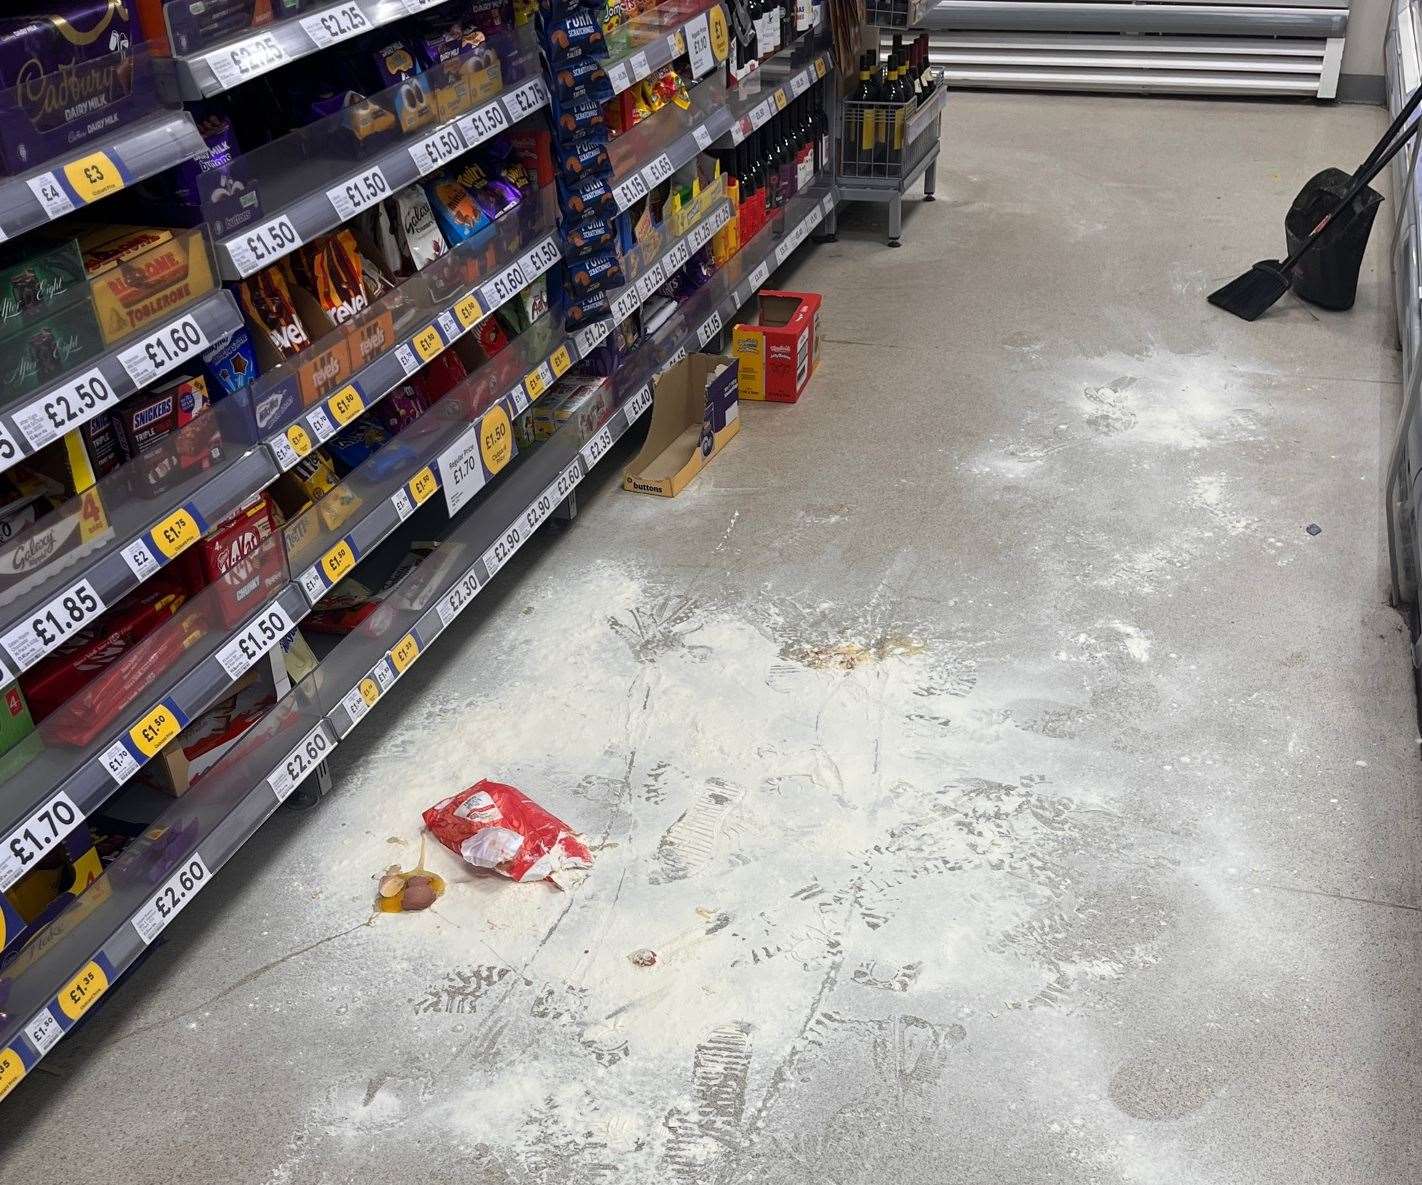 A pregnant woman had eggs and flour thrown at her after youths trashed a Tesco Express in Paddock Wood